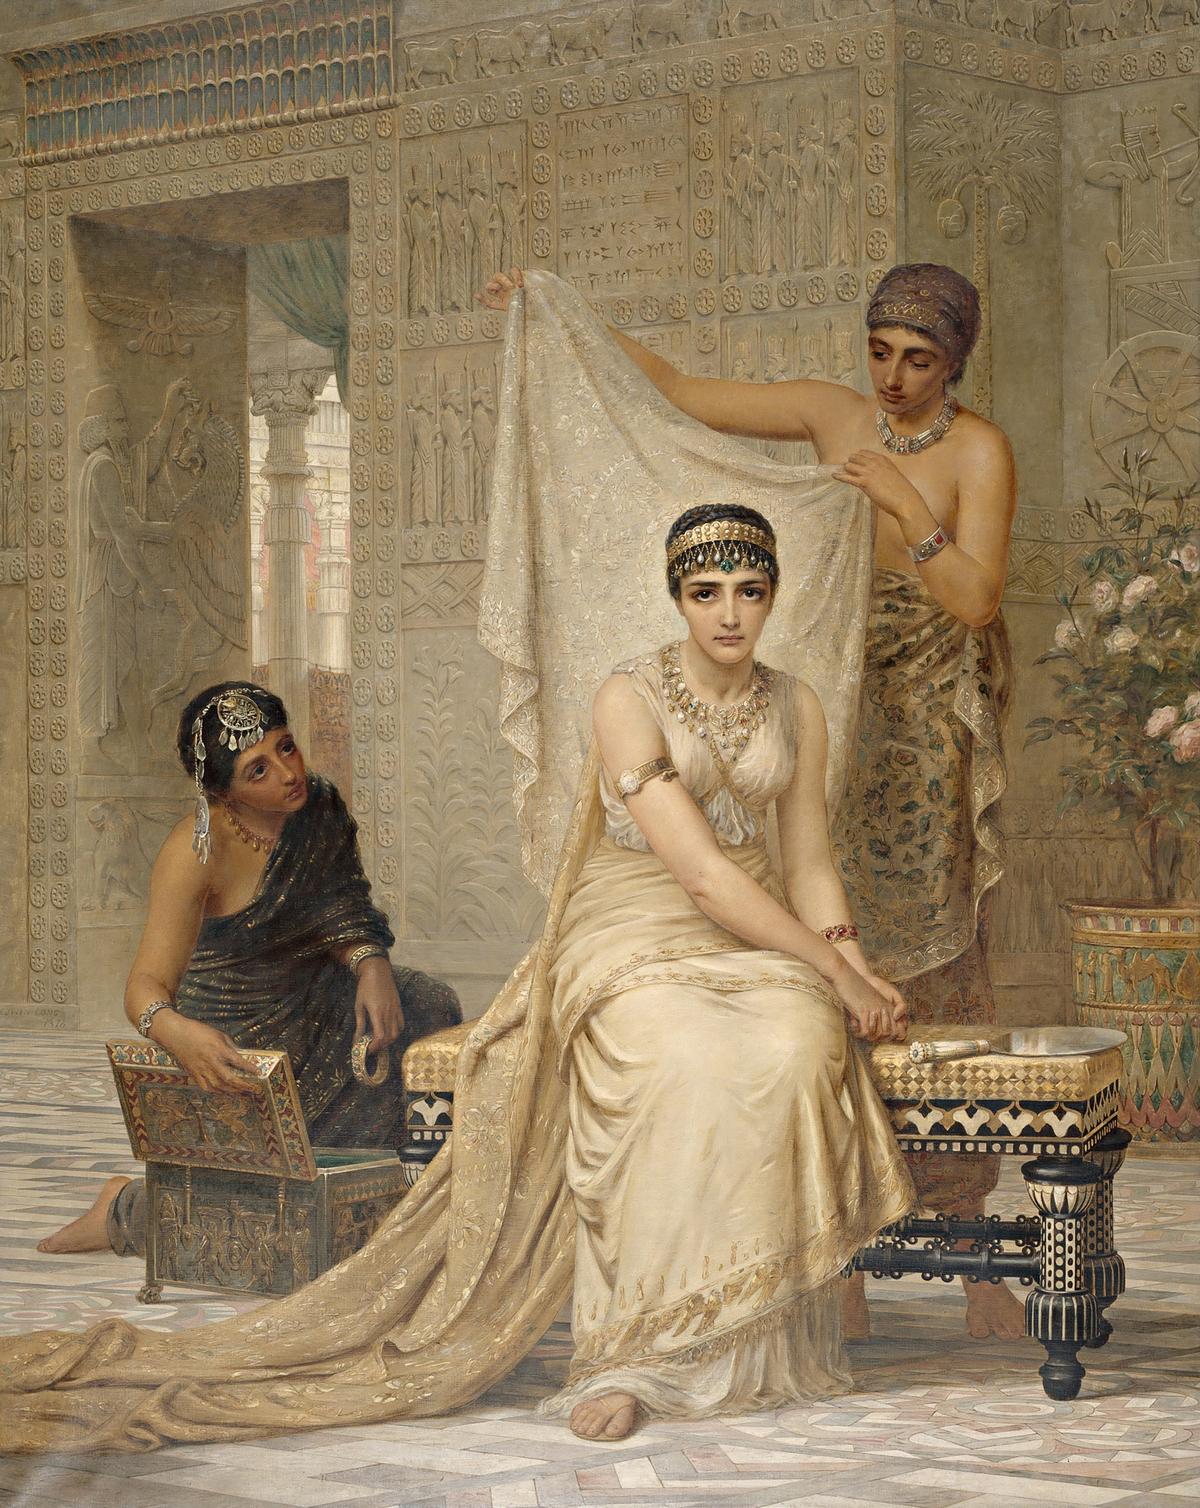 "Queen Esther," 1878, by Edwin Long. Oil on canvas; 84 inches by 67 inches. National Gallery of Victoria, Australia. (Public Domain)